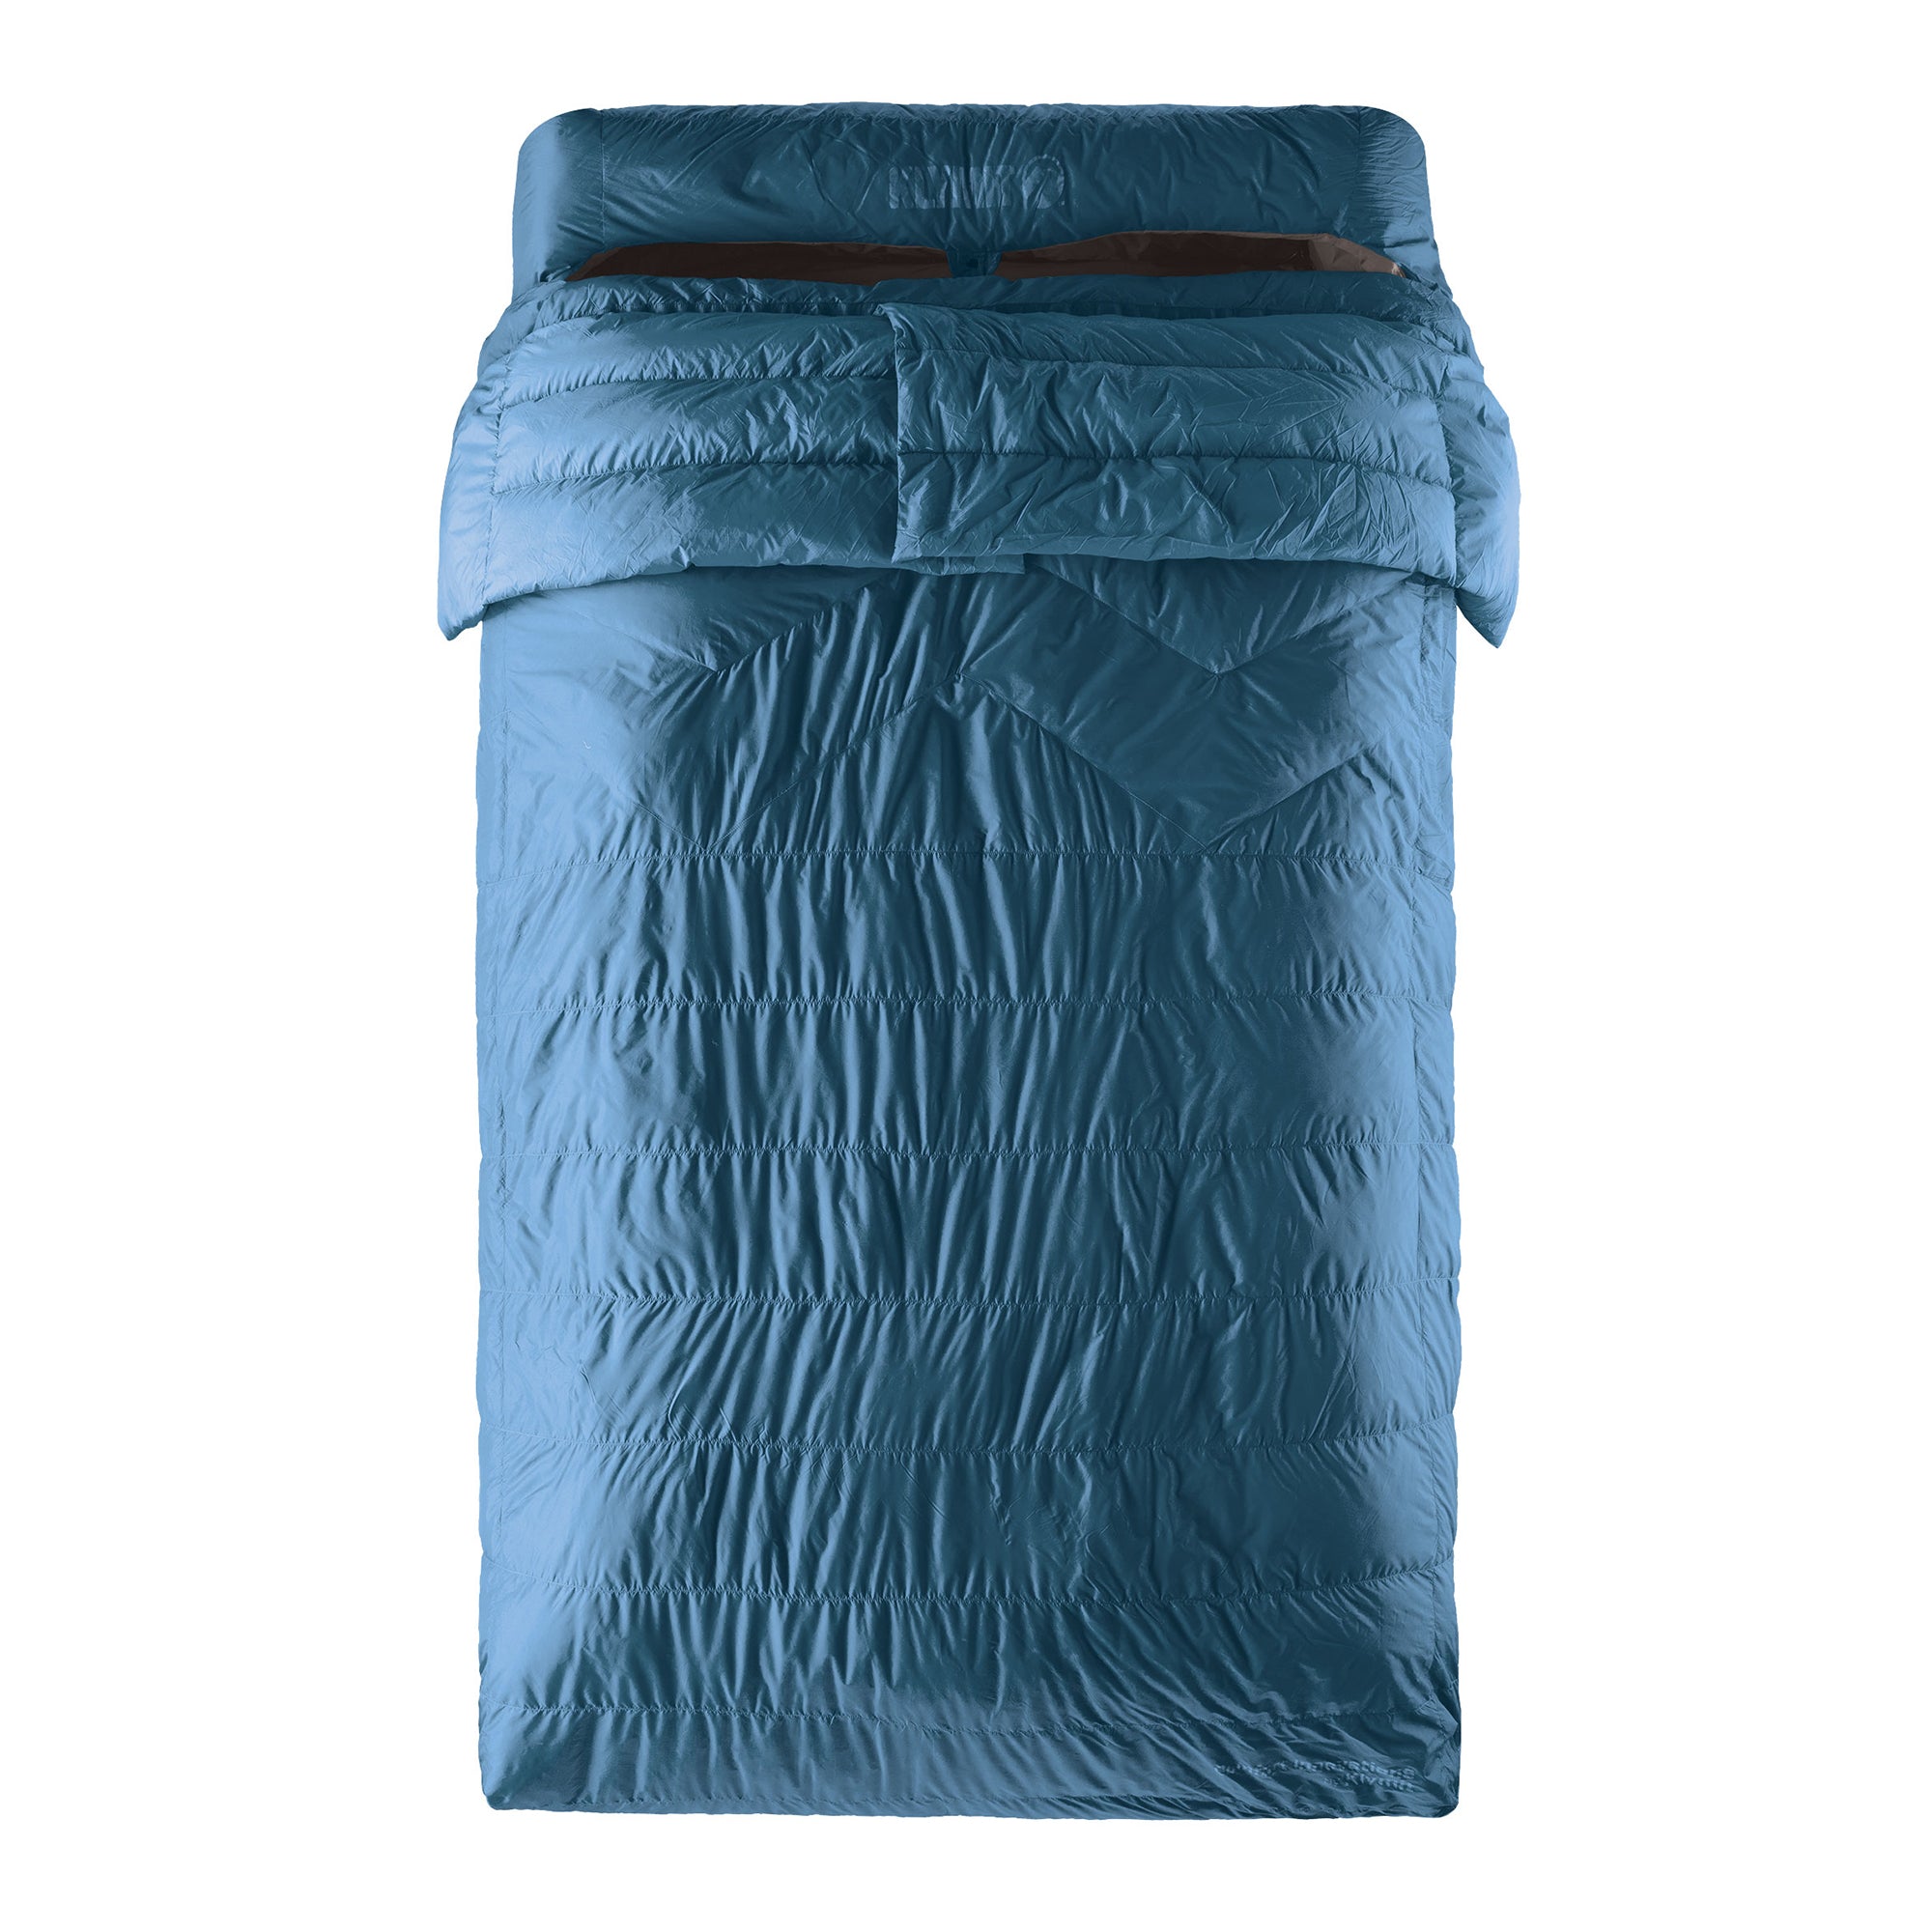 30 Degree Two Person Full-Synthetic Sleeping Bag Sleeping Bags